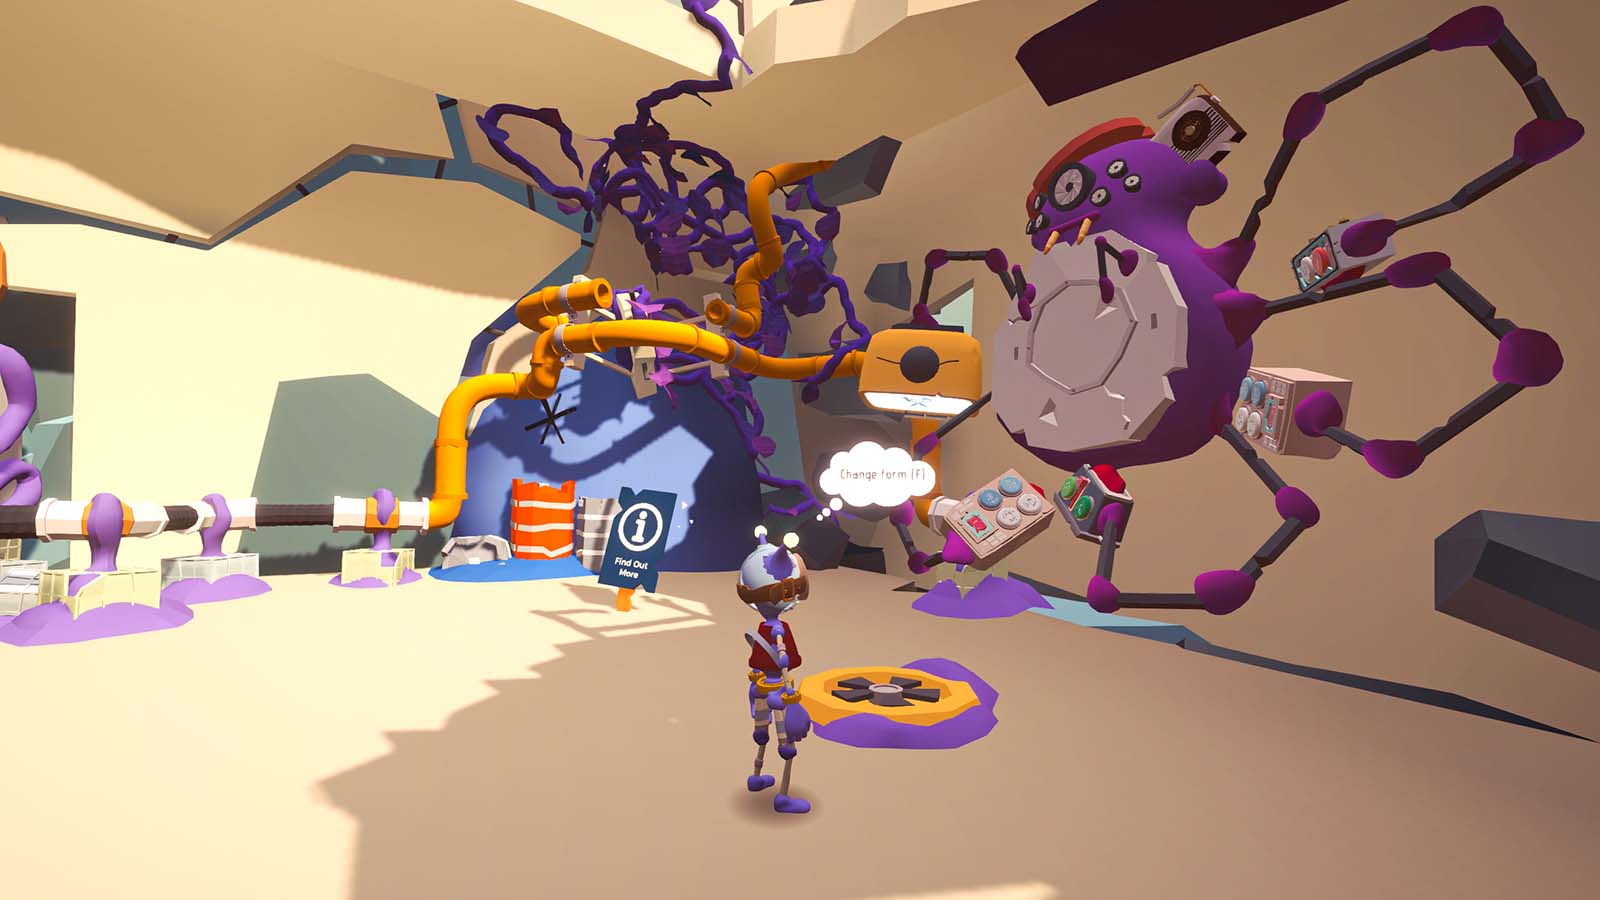 In-Game sceenshot of the player character interacting with the attaching machine